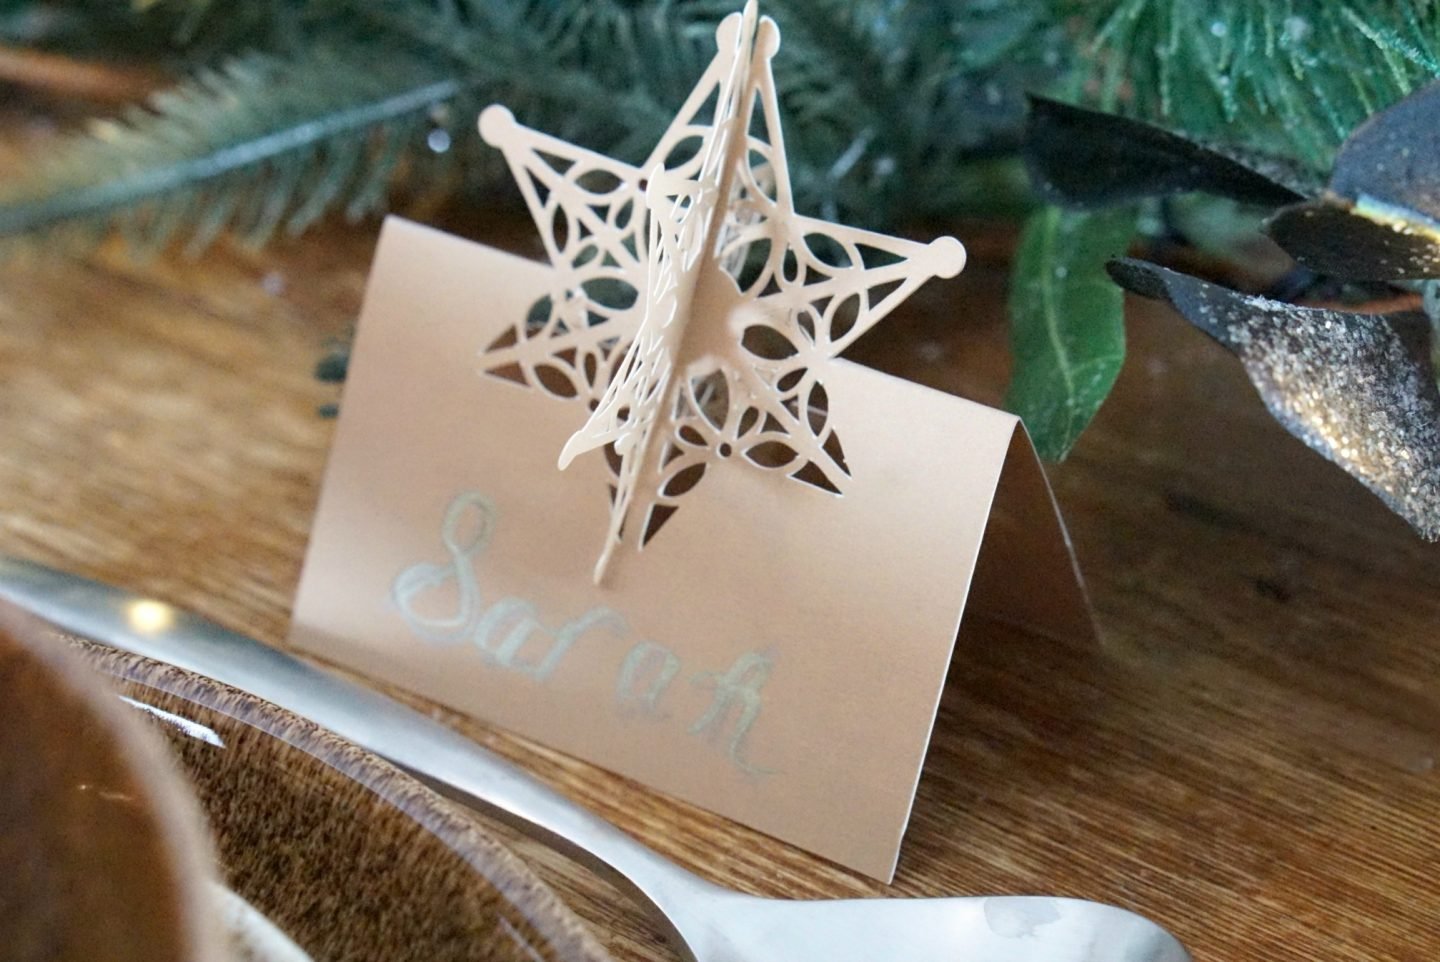 Home Made Snow Flake Place Card from Cricut Air www.extraordinarychaos.com